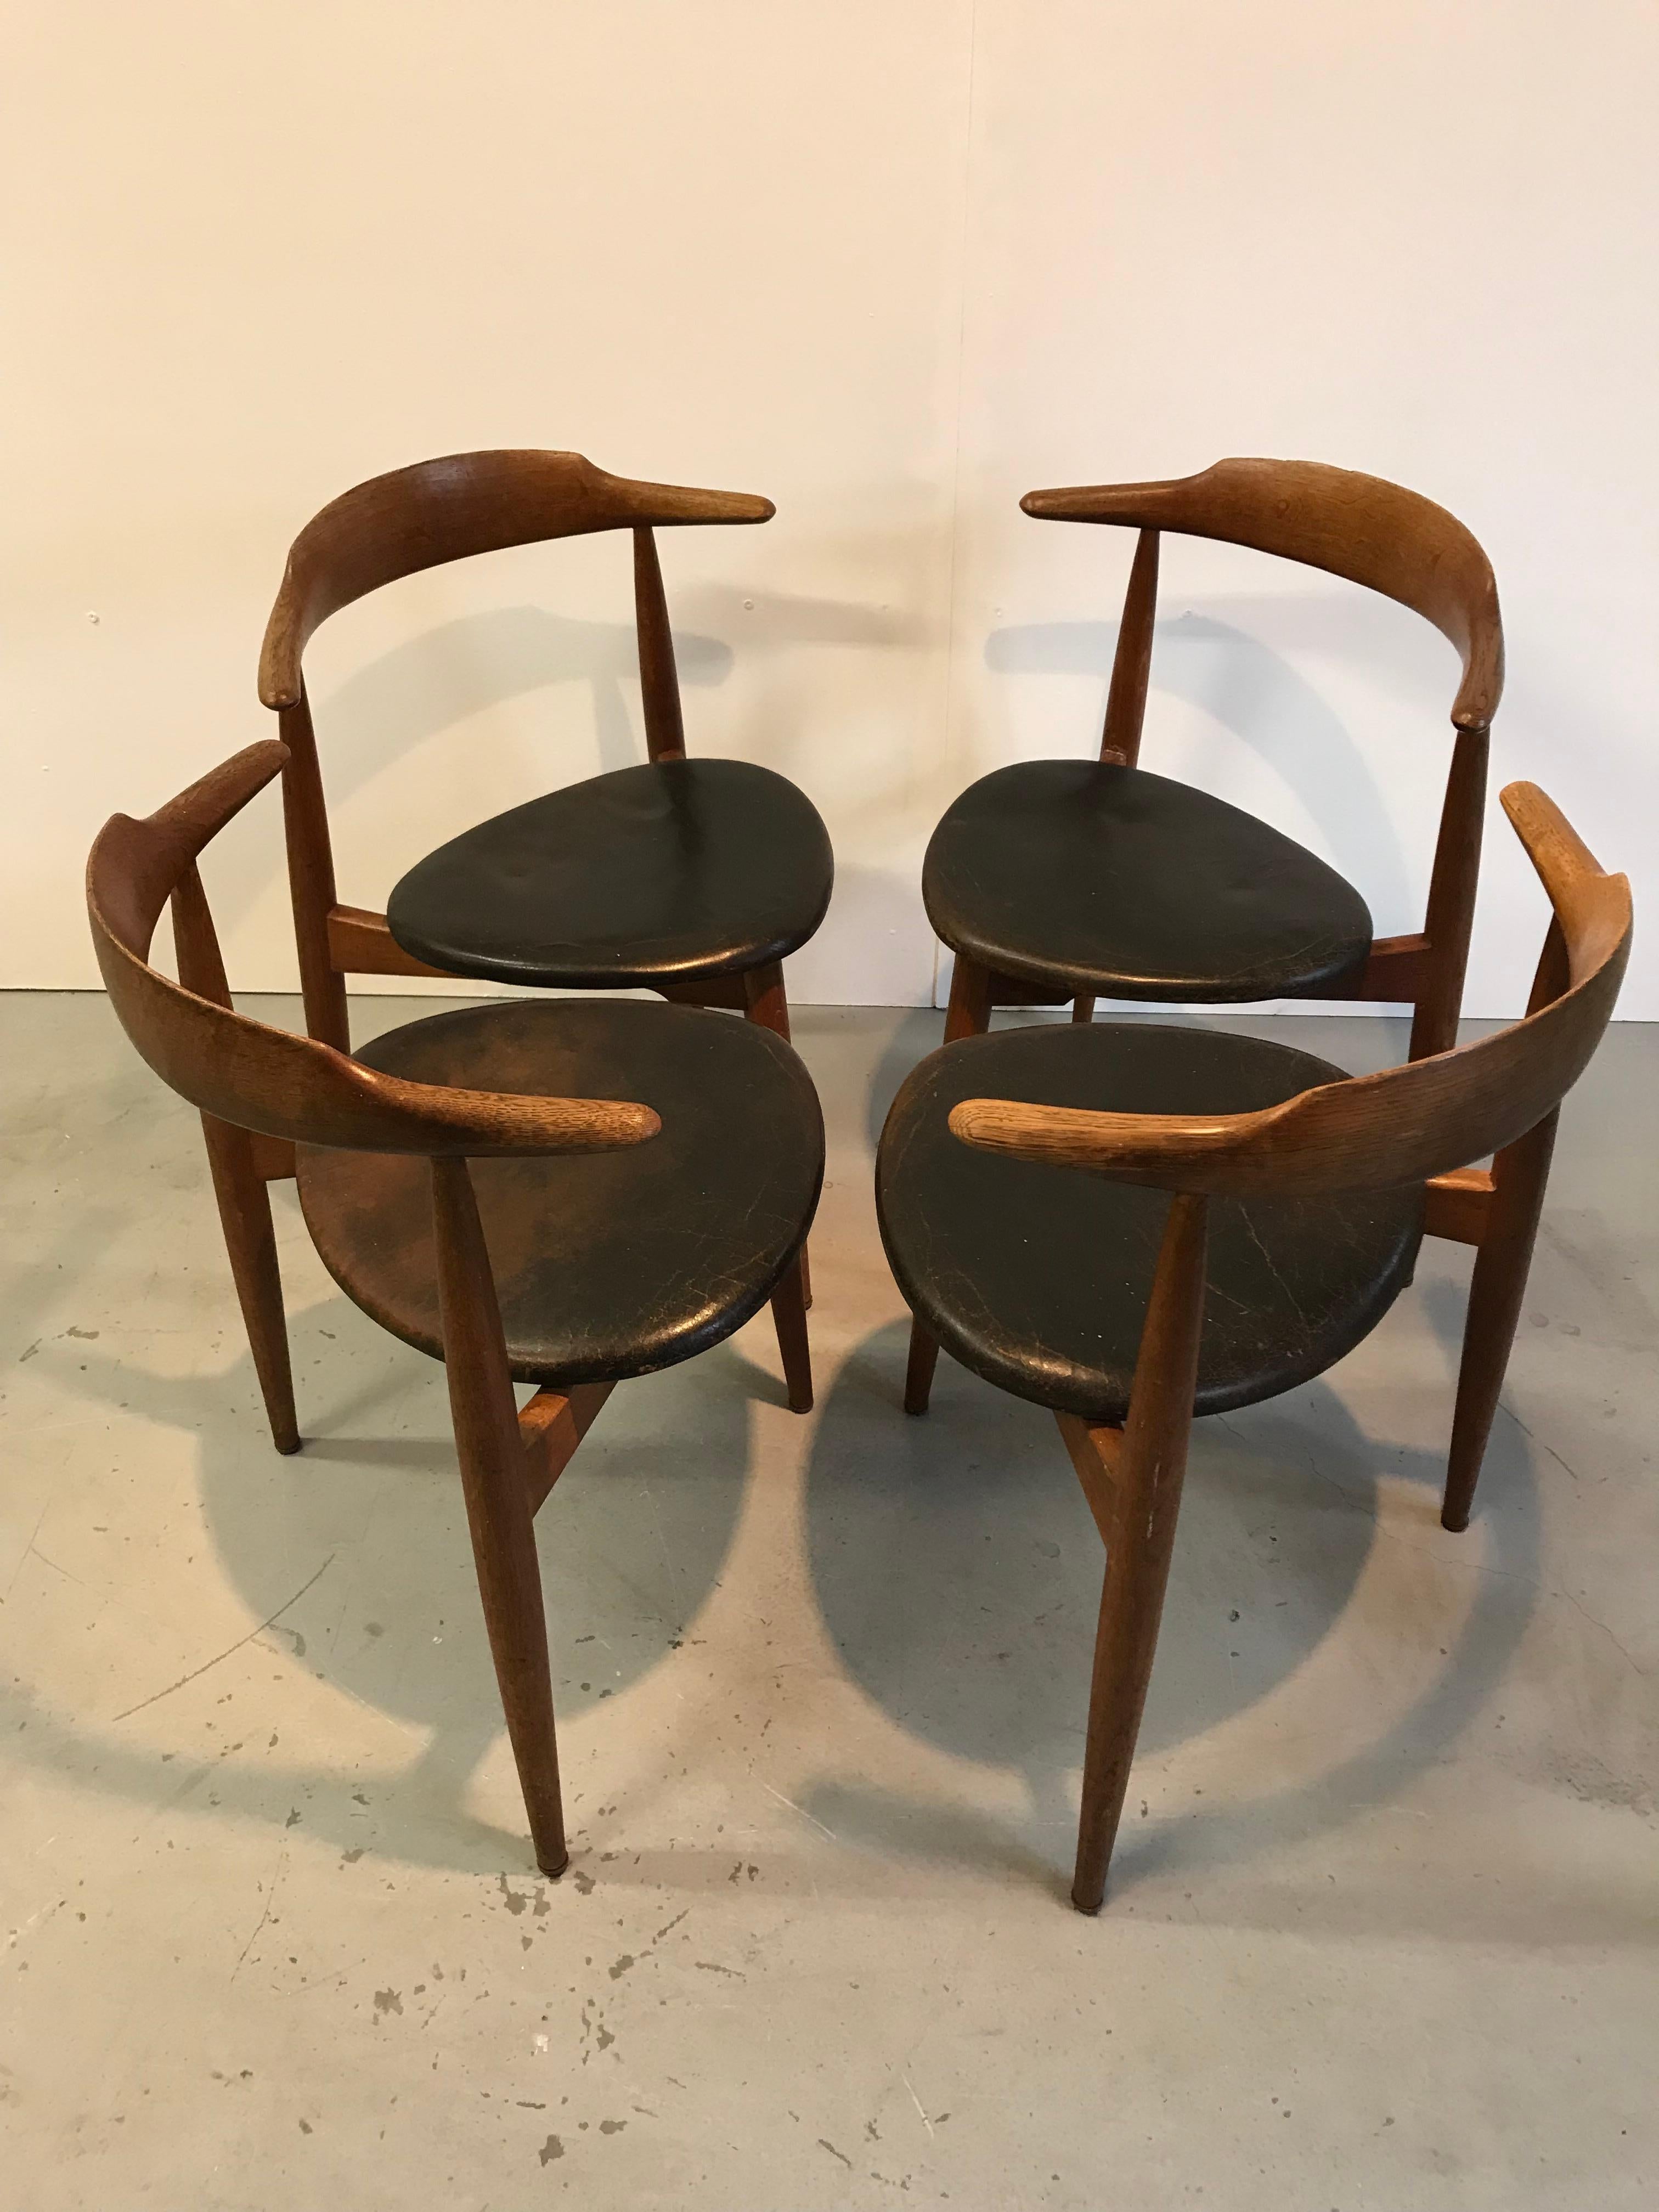 4 Fritz Hansen dining chairs, designed by Hans Wegner in the 1950s. Oak wood with black leather upholstery.
Very nice vintage condition.